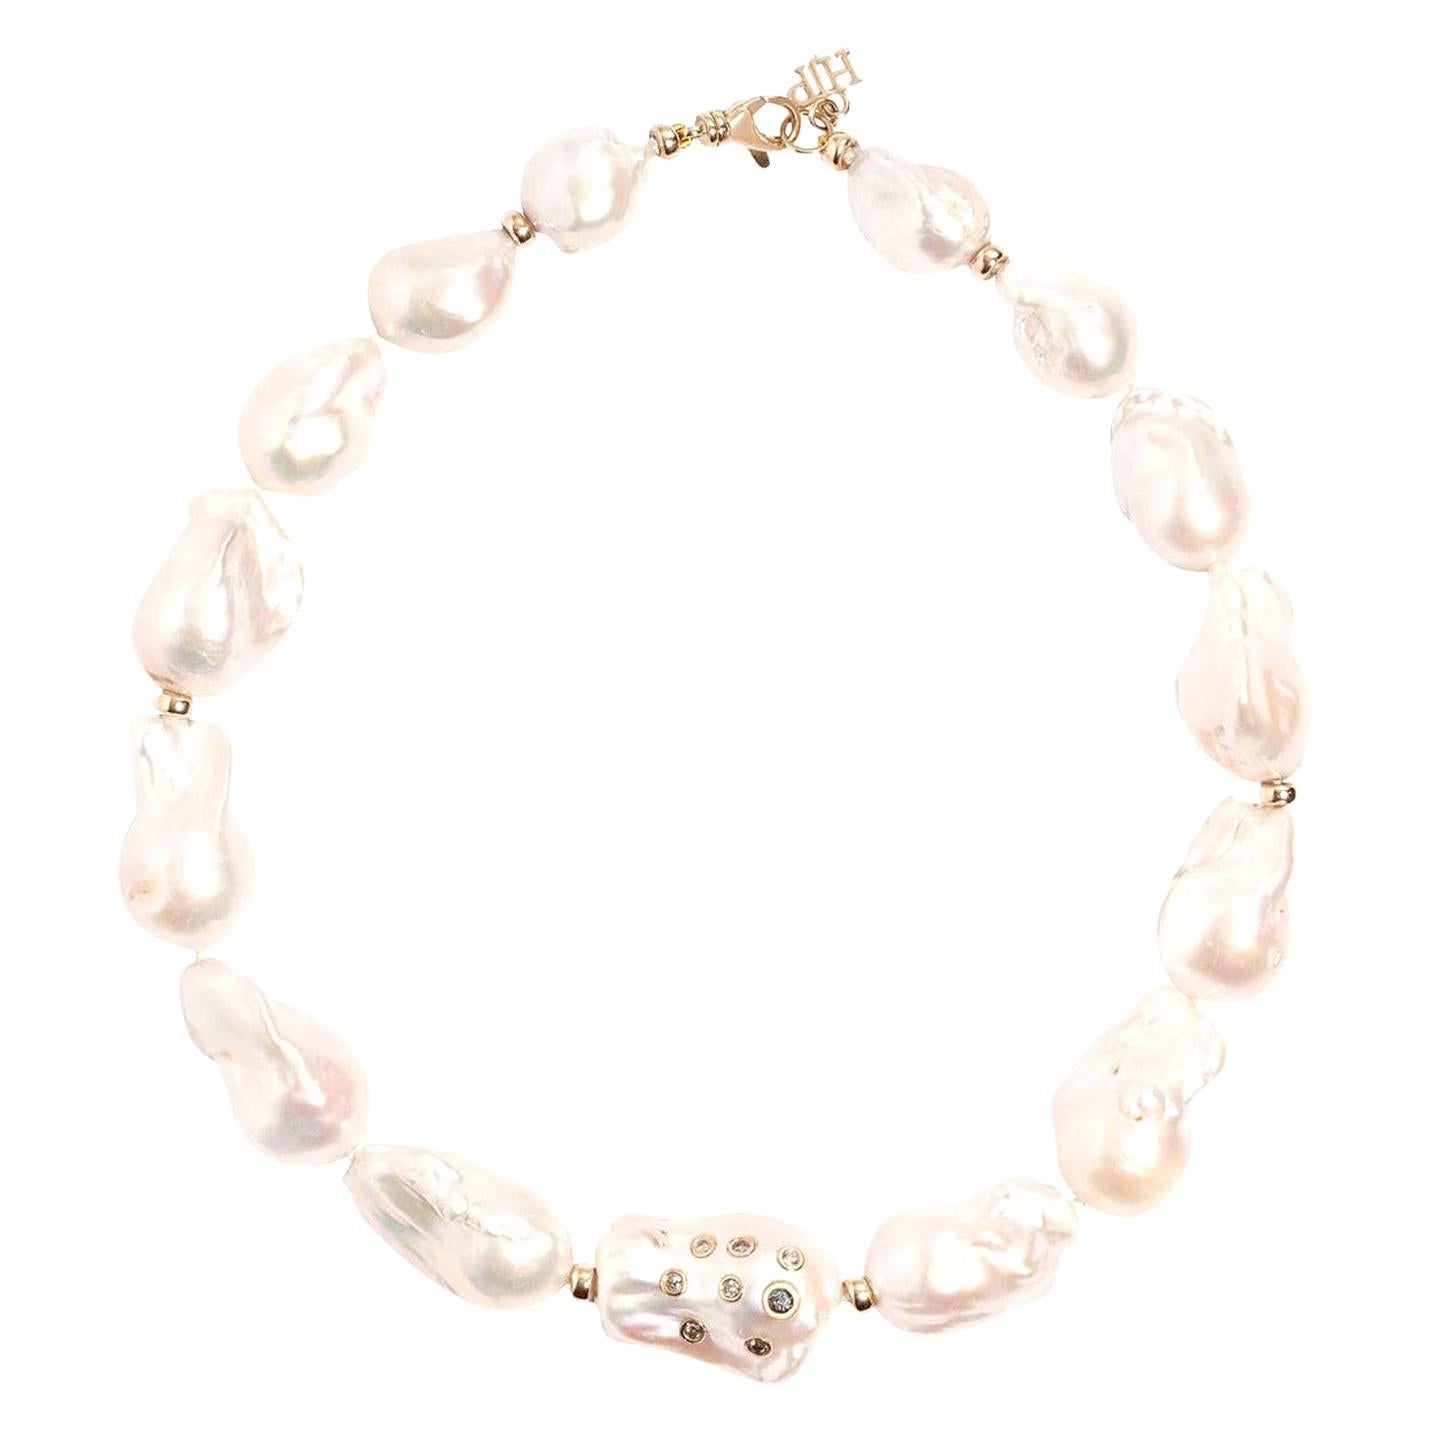 0.44 Carat Salt and Pepper Diamond Large Baroque Pearl Strand Necklace